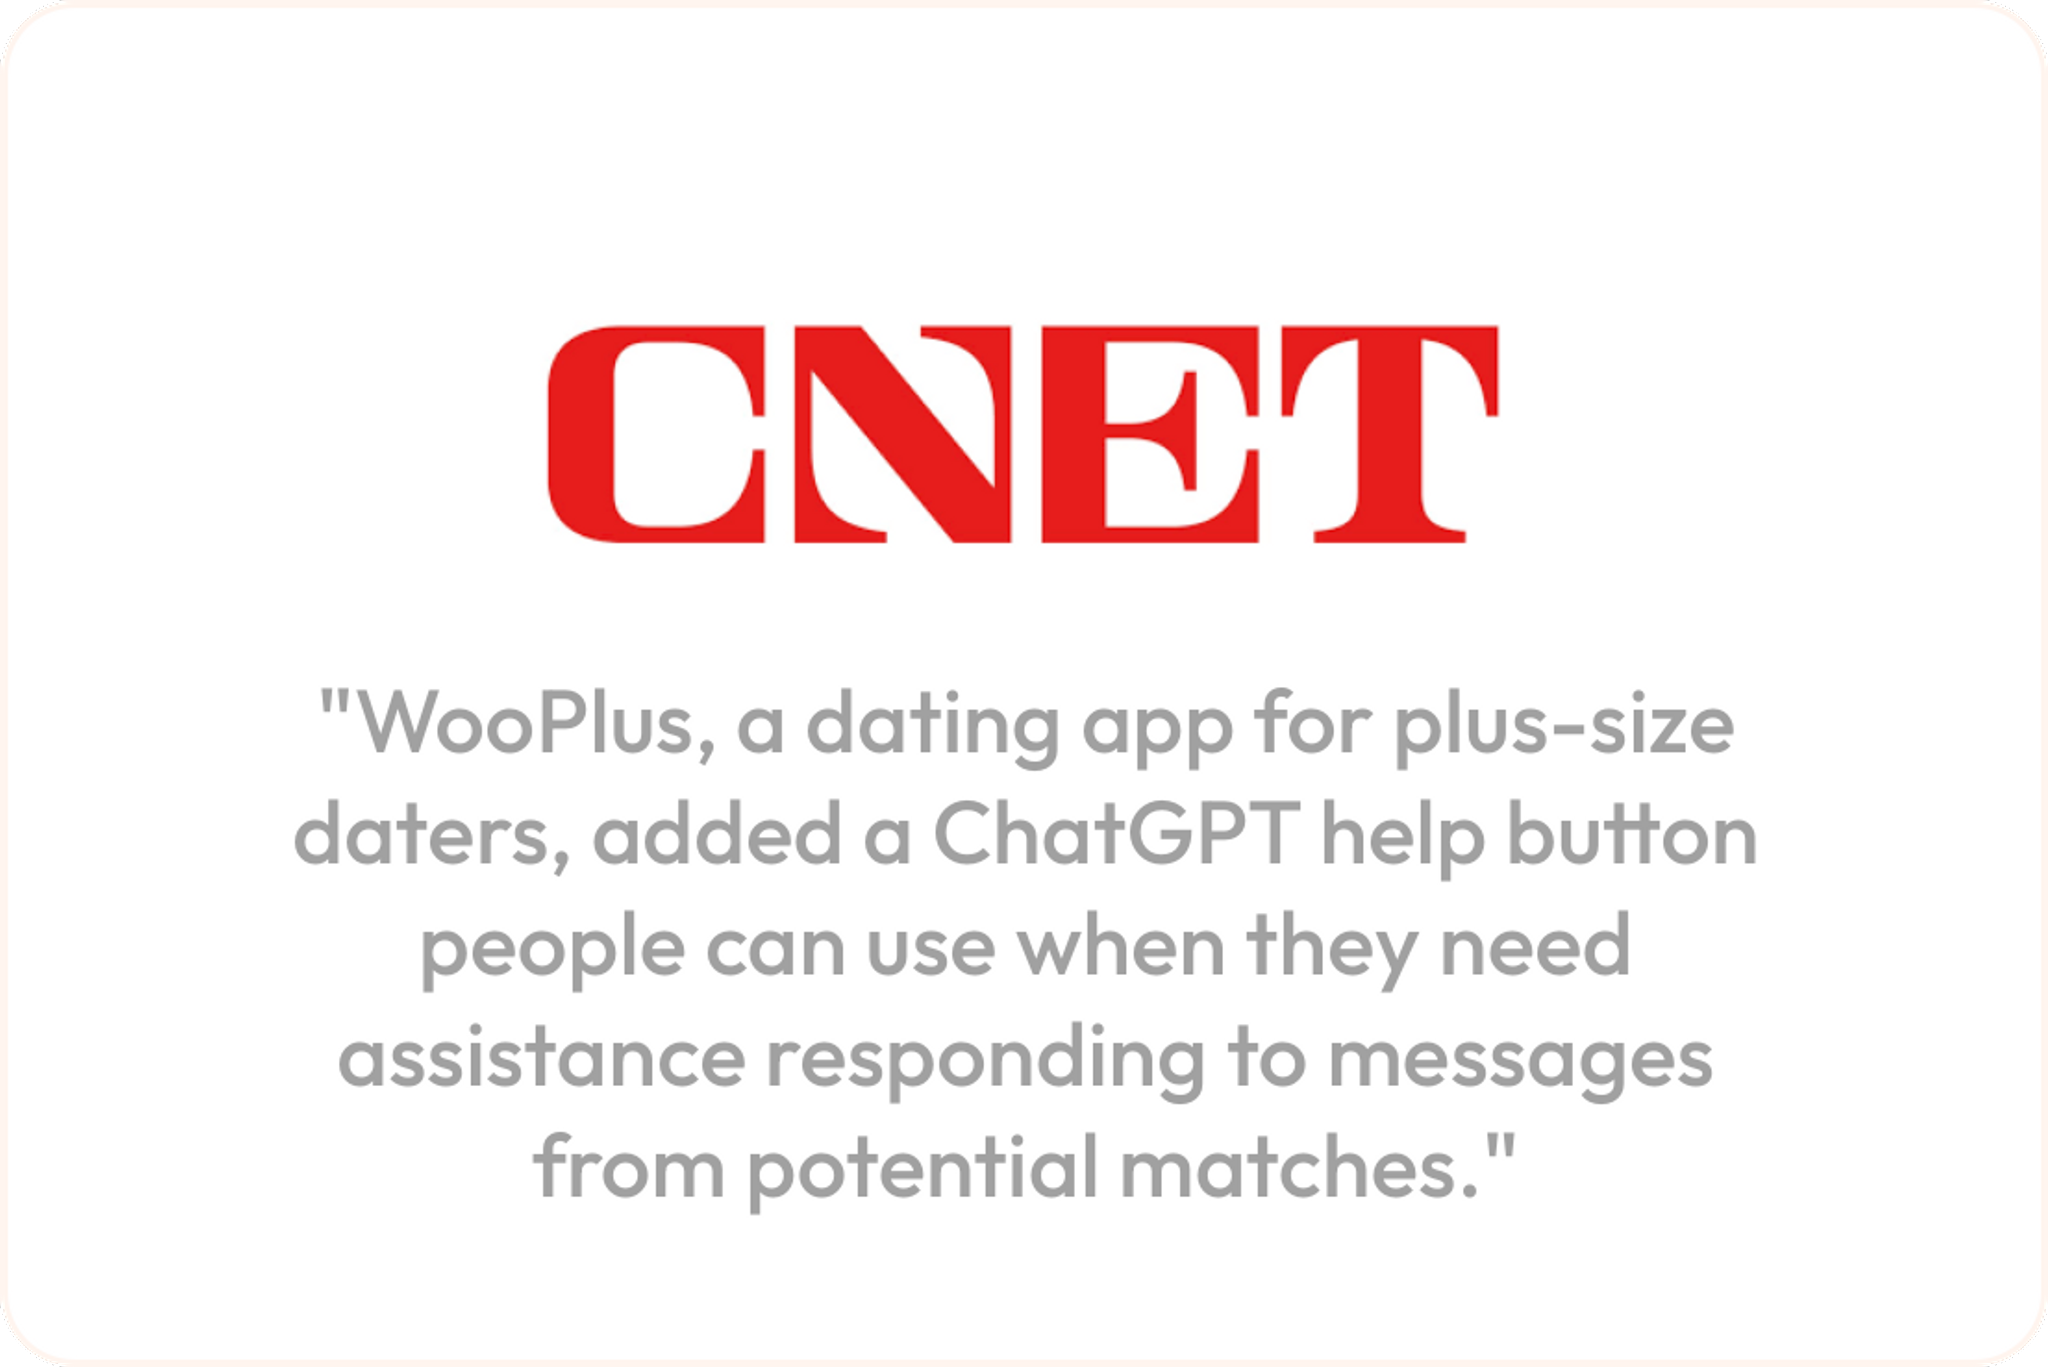 https://www.cnet.com/culture/internet/what-happened-when-chatgpt-got-hold-of-my-online-dating-profile/